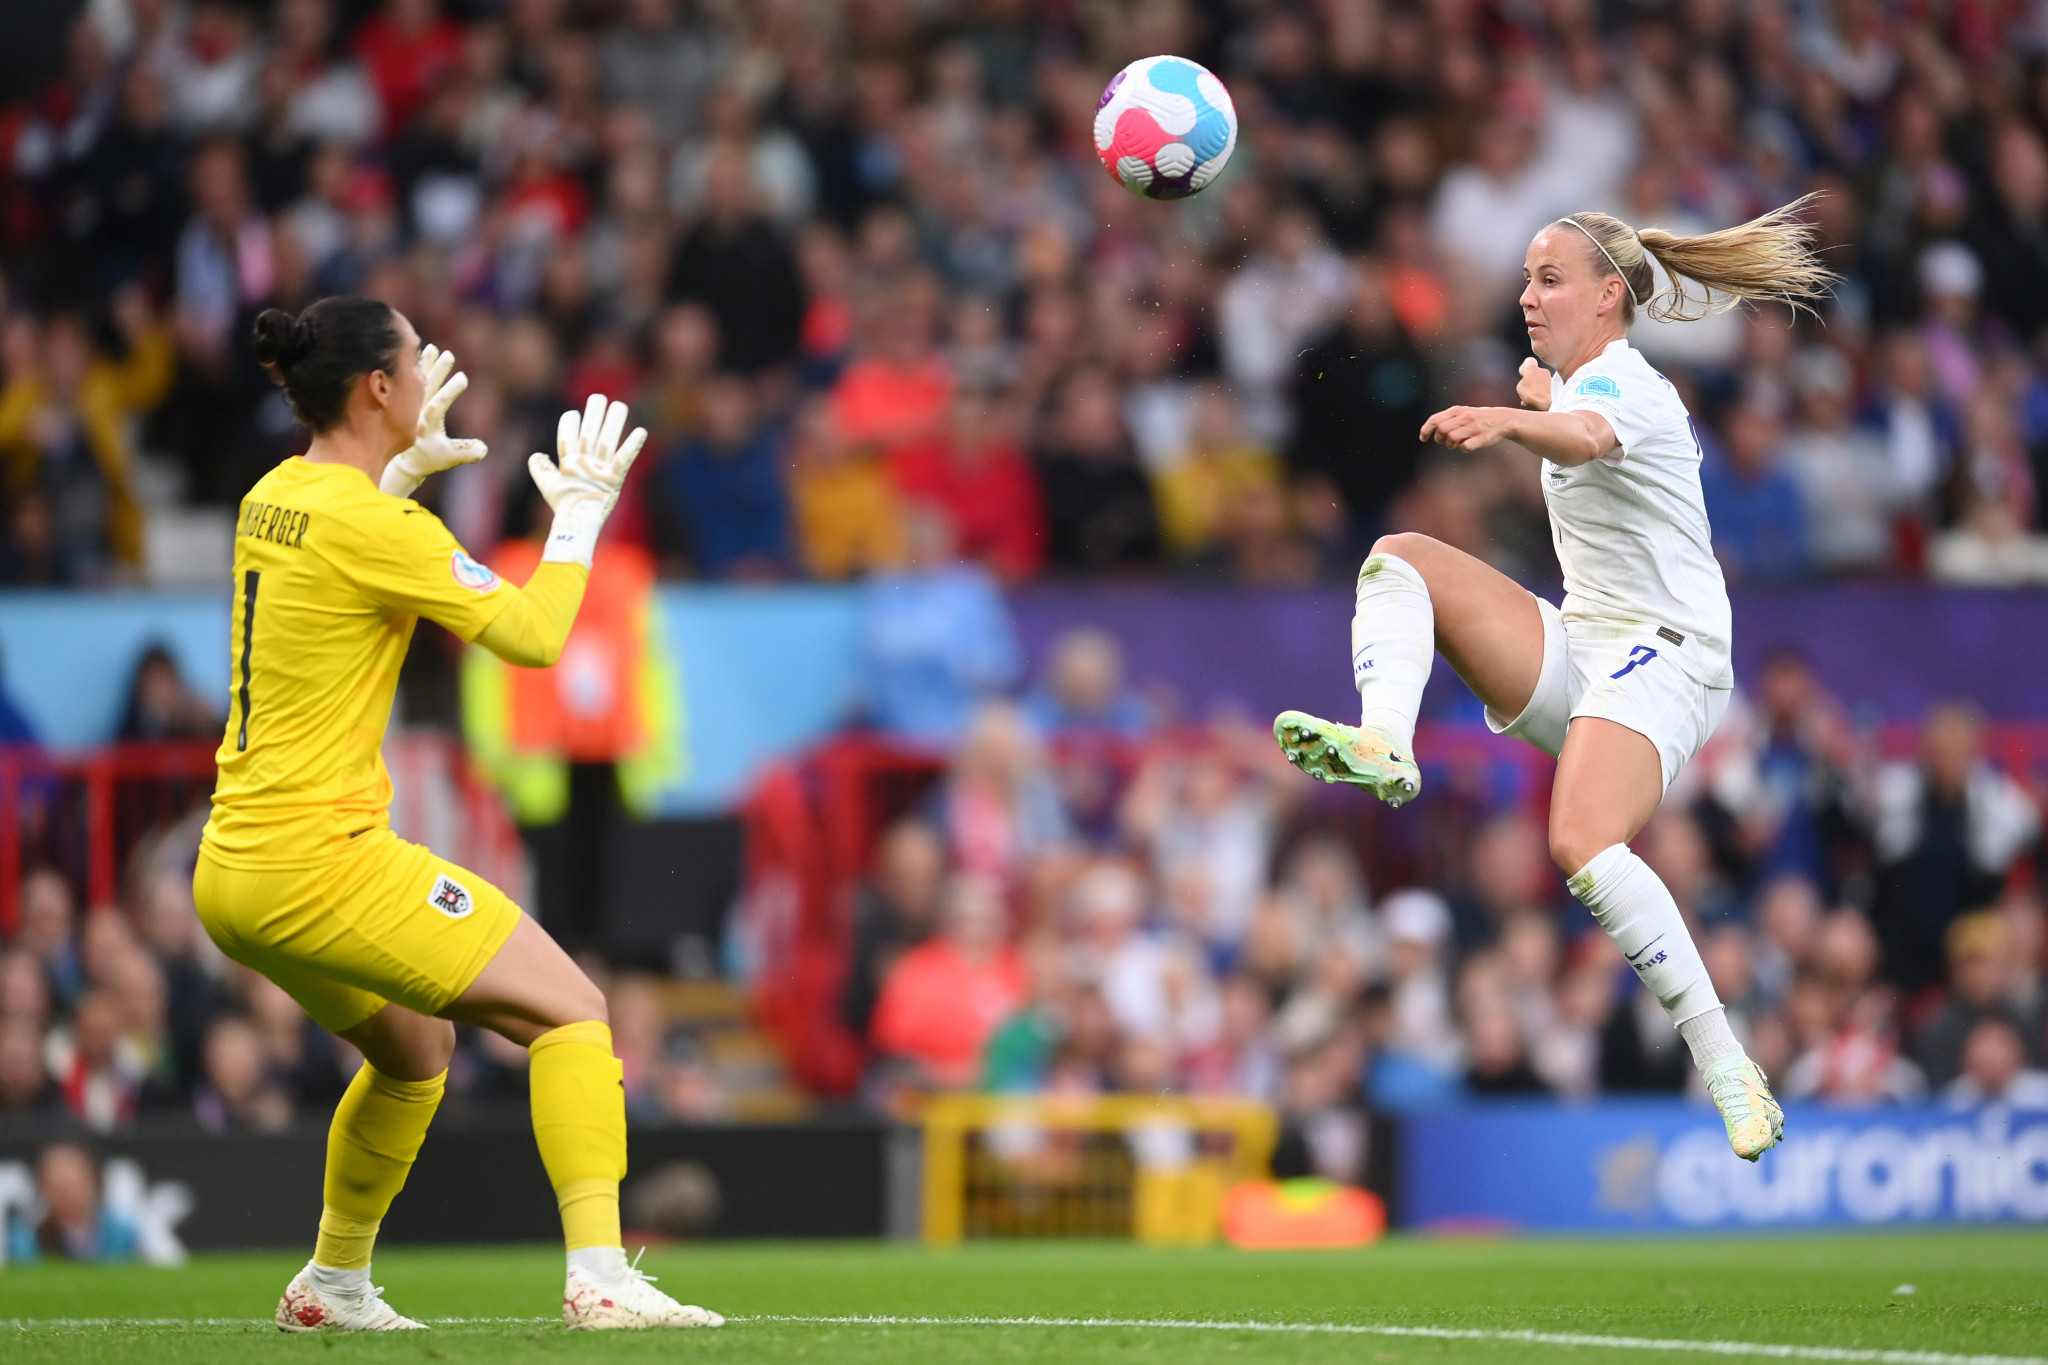 Hosts England get off to winning start at Women’s Euro 2022 in front of tournament record crowd 